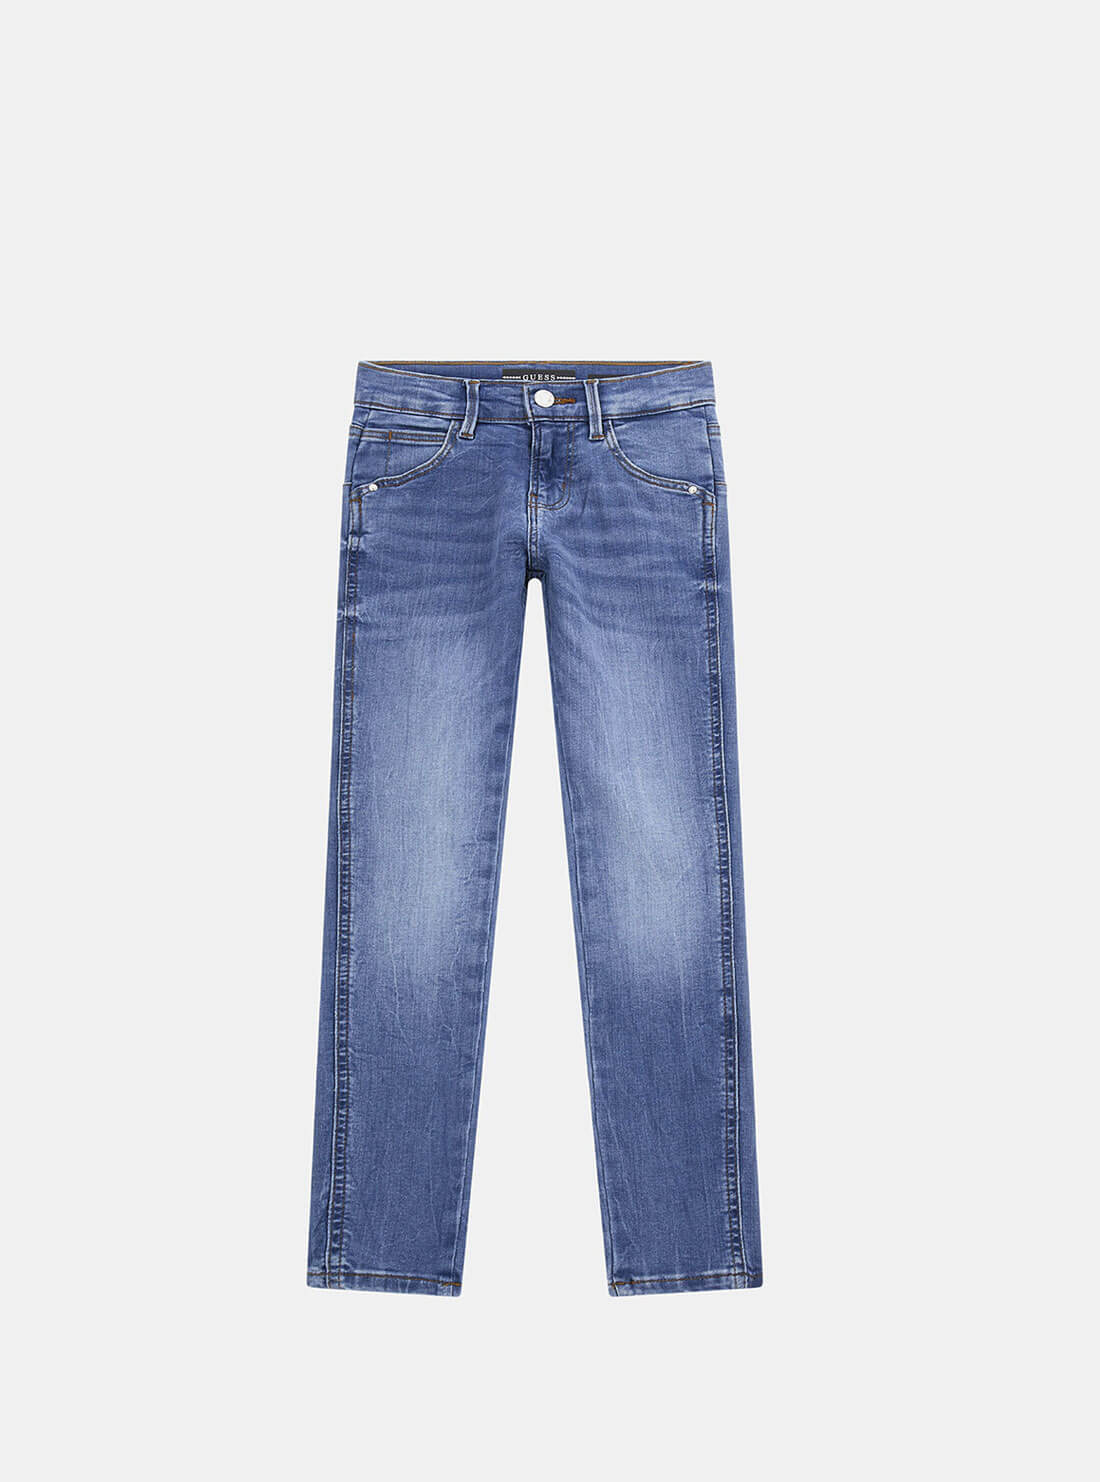 Blue Denim Skinny Jeans (7-16) | GUESS Kids | front view